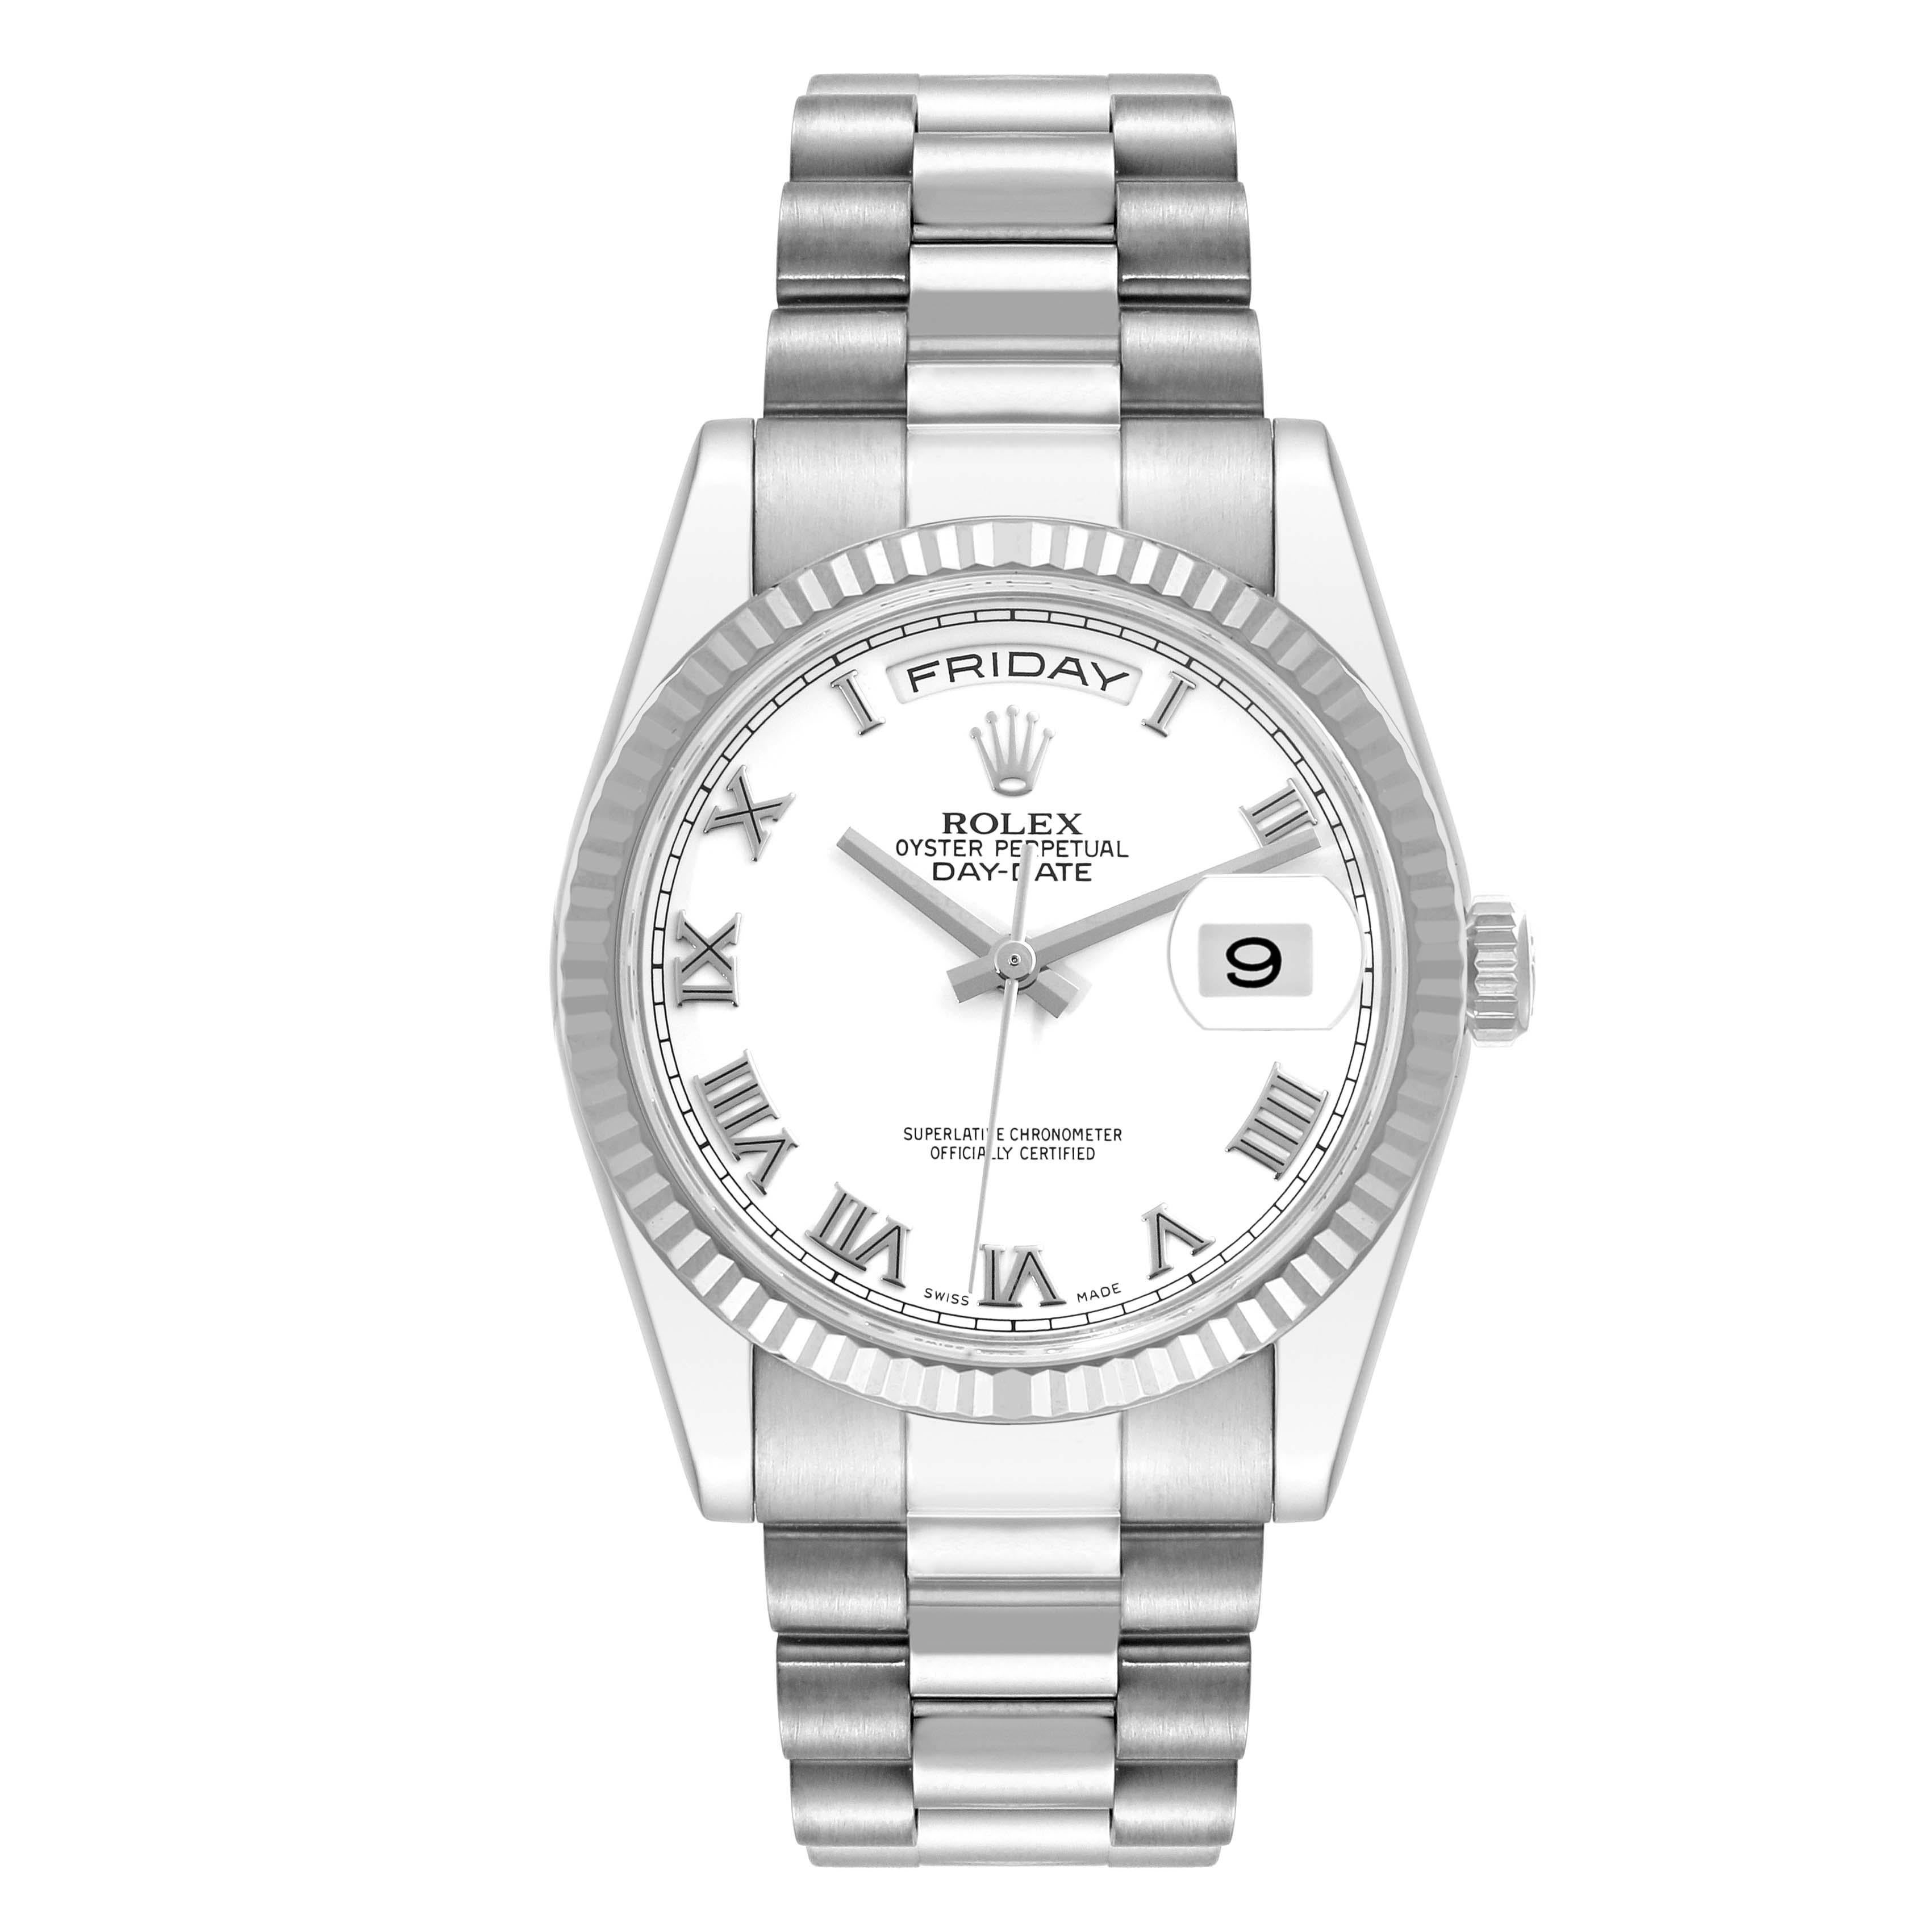 Rolex President Day-Date White Gold Mens Watch 118239 Box Card. Original Rolex officially certified chronometer self-winding movement with quickset date function. Original Rolex 18k white gold oyster case 36.0 mm in diameter. Rolex logo on a crown.